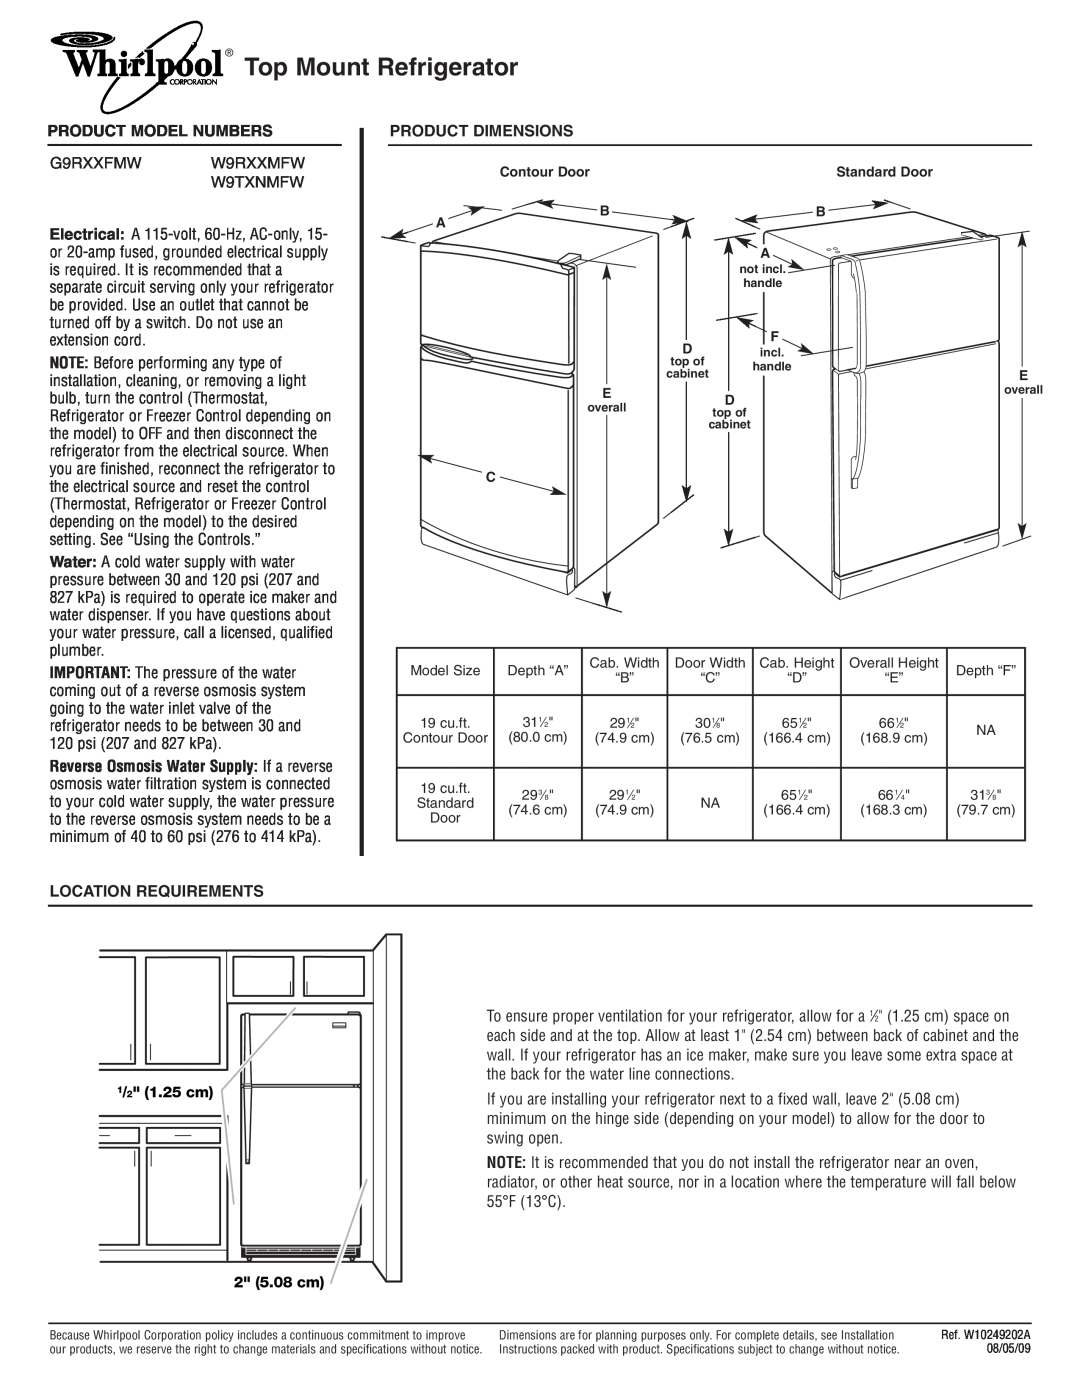 Whirlpool W9TXNMFW dimensions Top Mount Refrigerator, Product Model Numbers, Product Dimensions, Location Requirements 